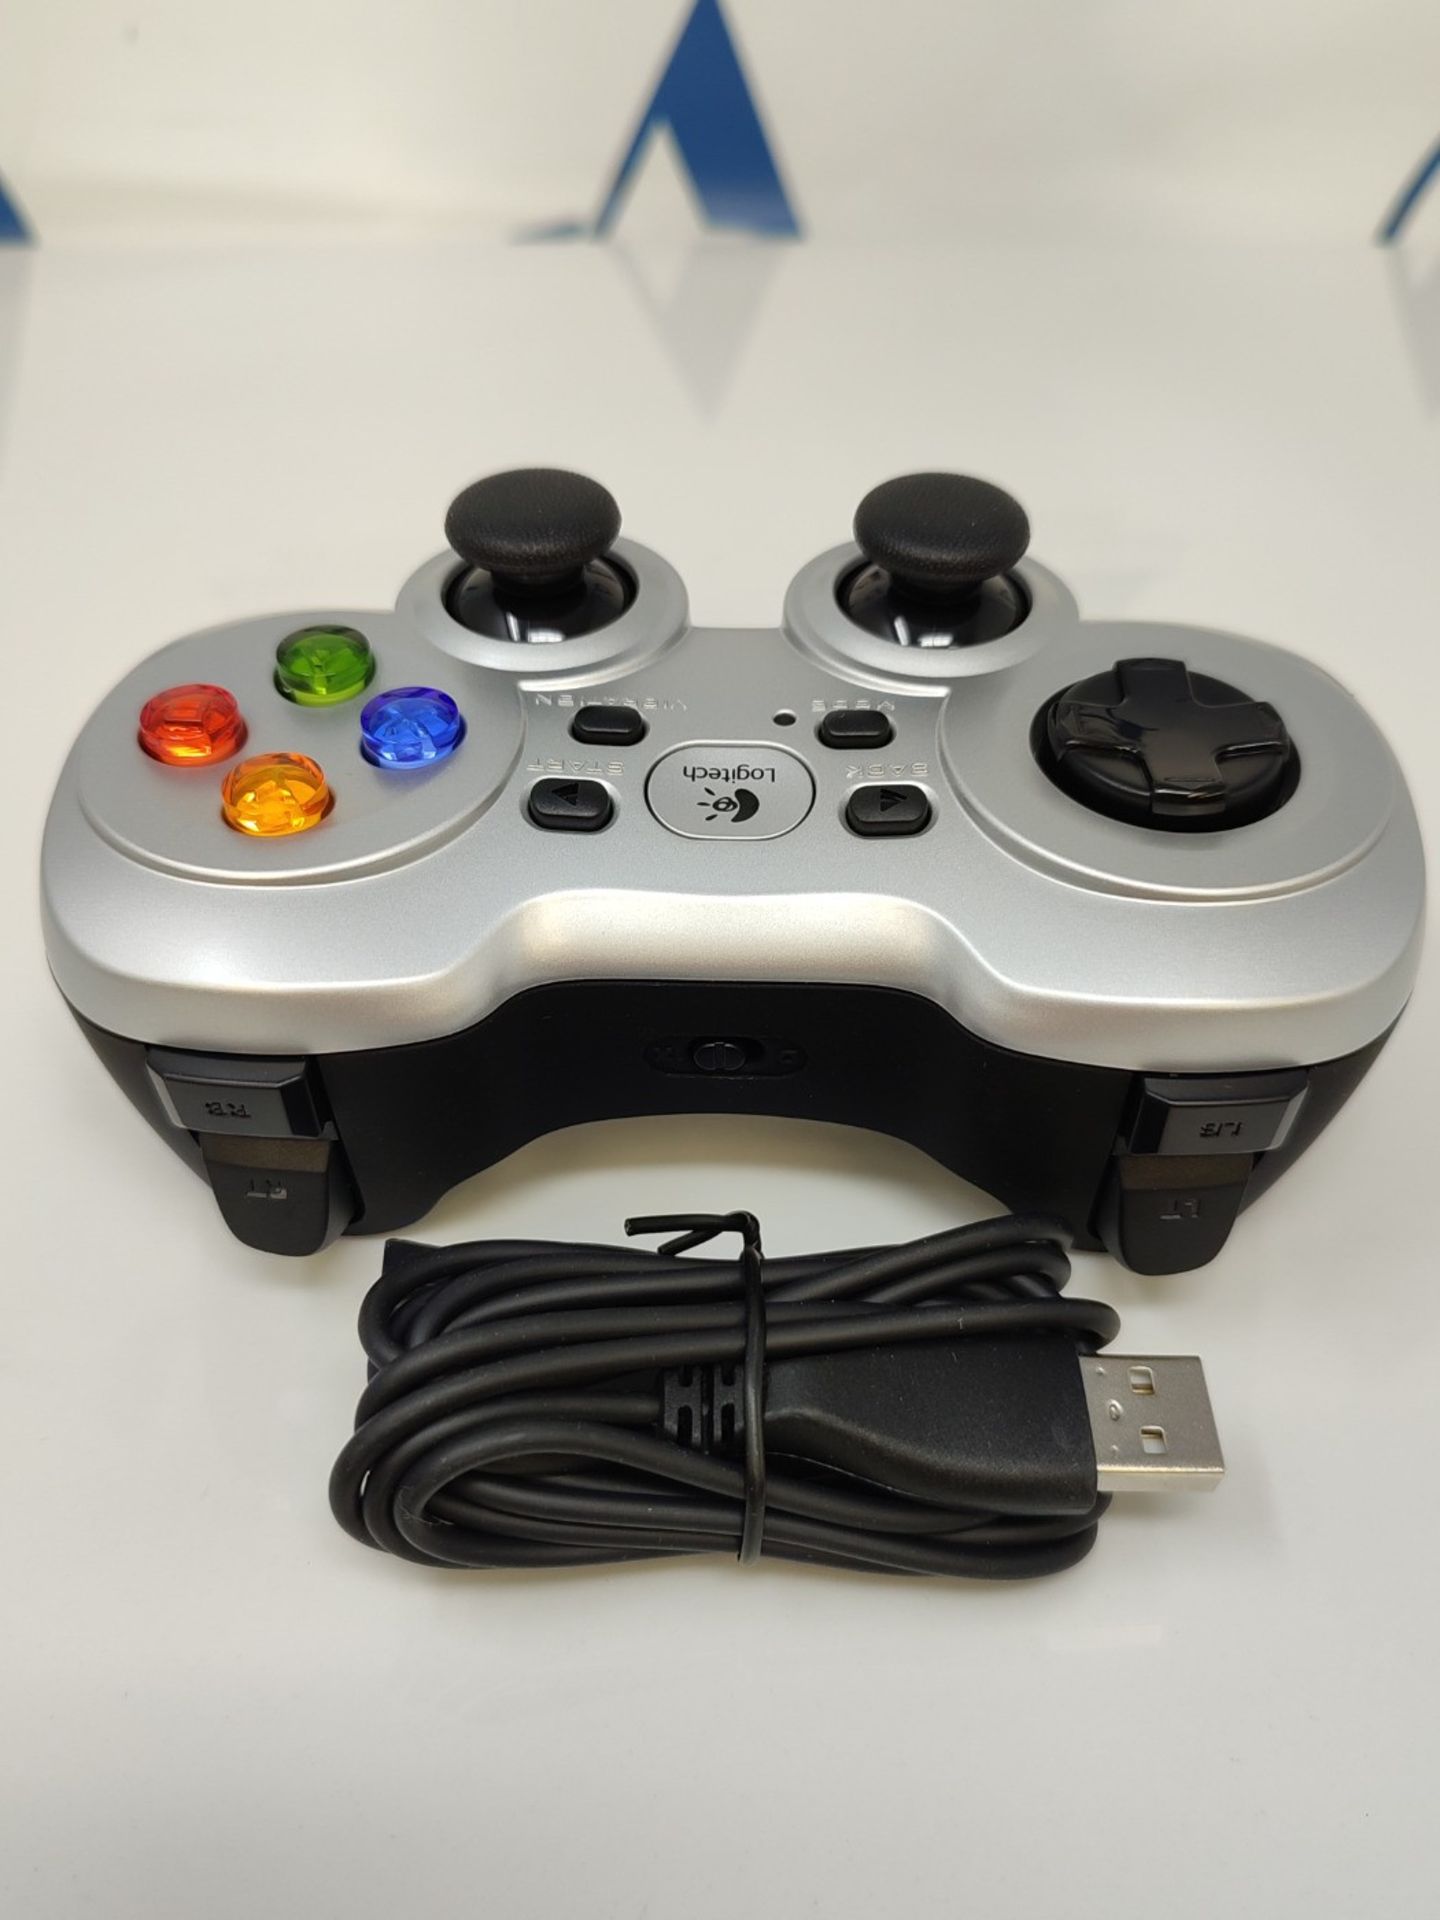 Logitech F710 Wireless Gamepad, Game Controller with Console-like Layout, 4 Button D-P - Image 3 of 3